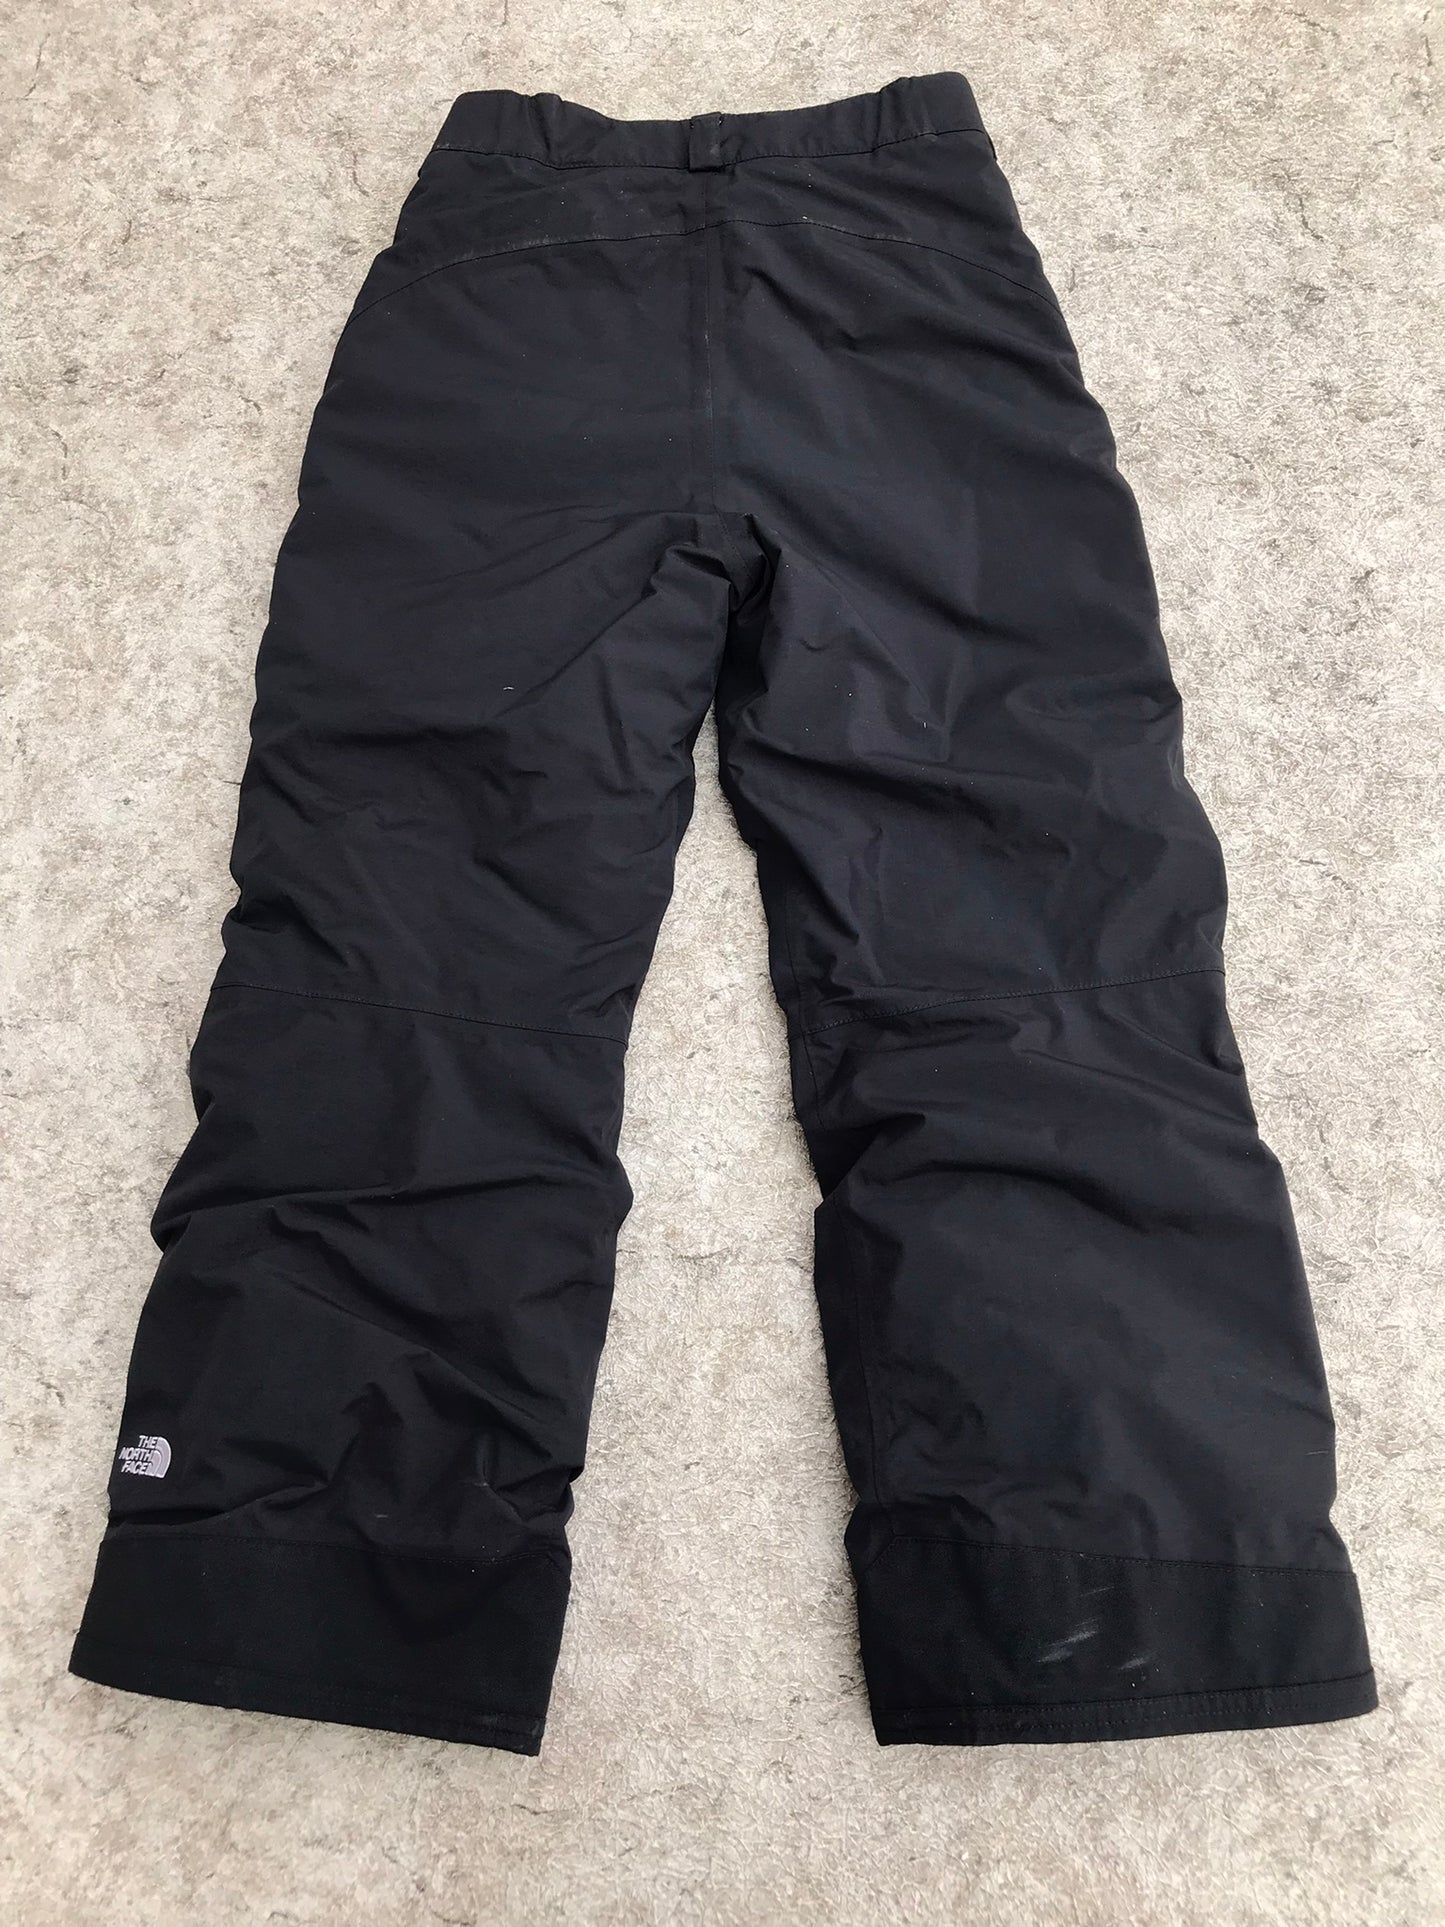 Snow Pants Child Size 14-16 Youth The North Face Hyvent Snowboarding Black As New Outstanding Quality